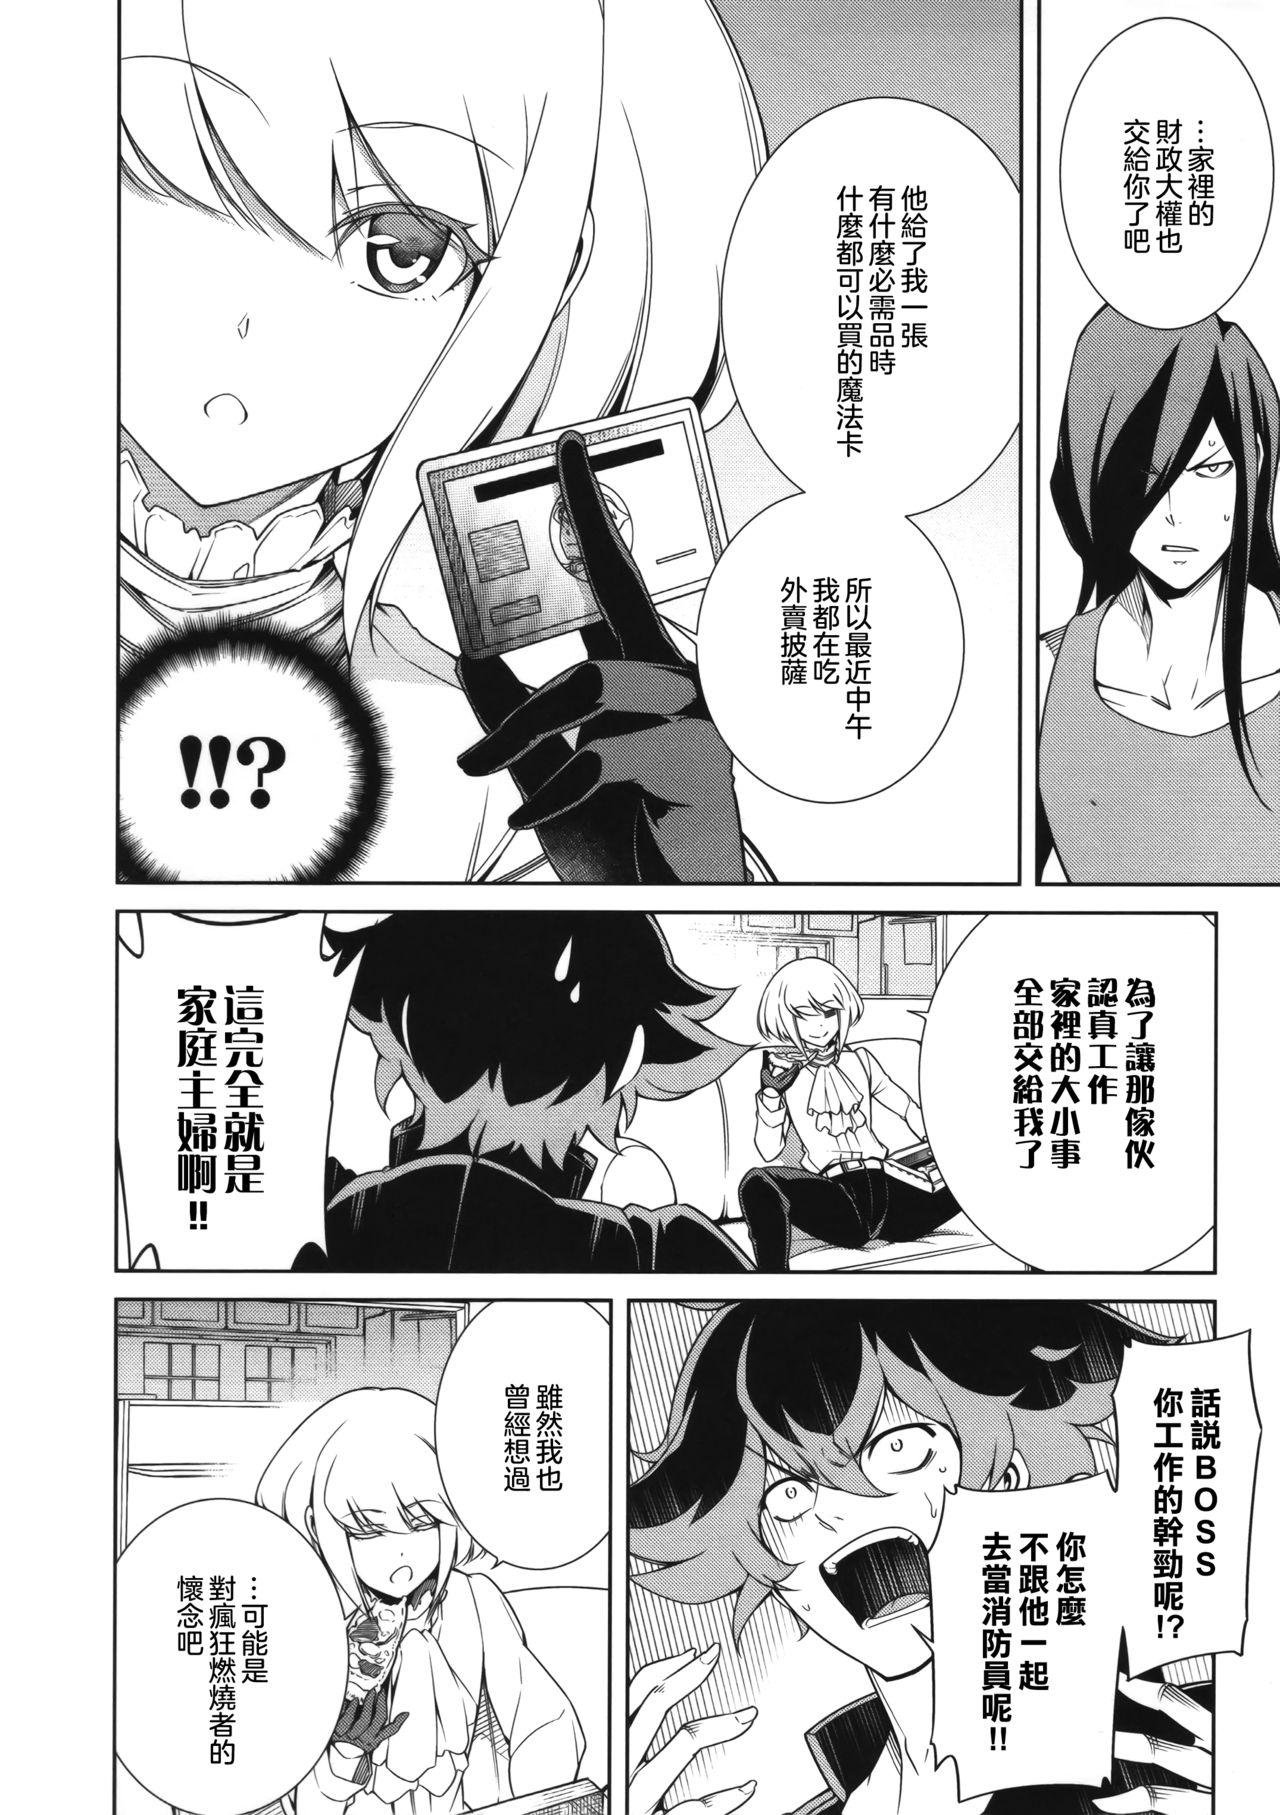 Oral Sex PROMISED PROPOSE - Promare 8teenxxx - Page 10